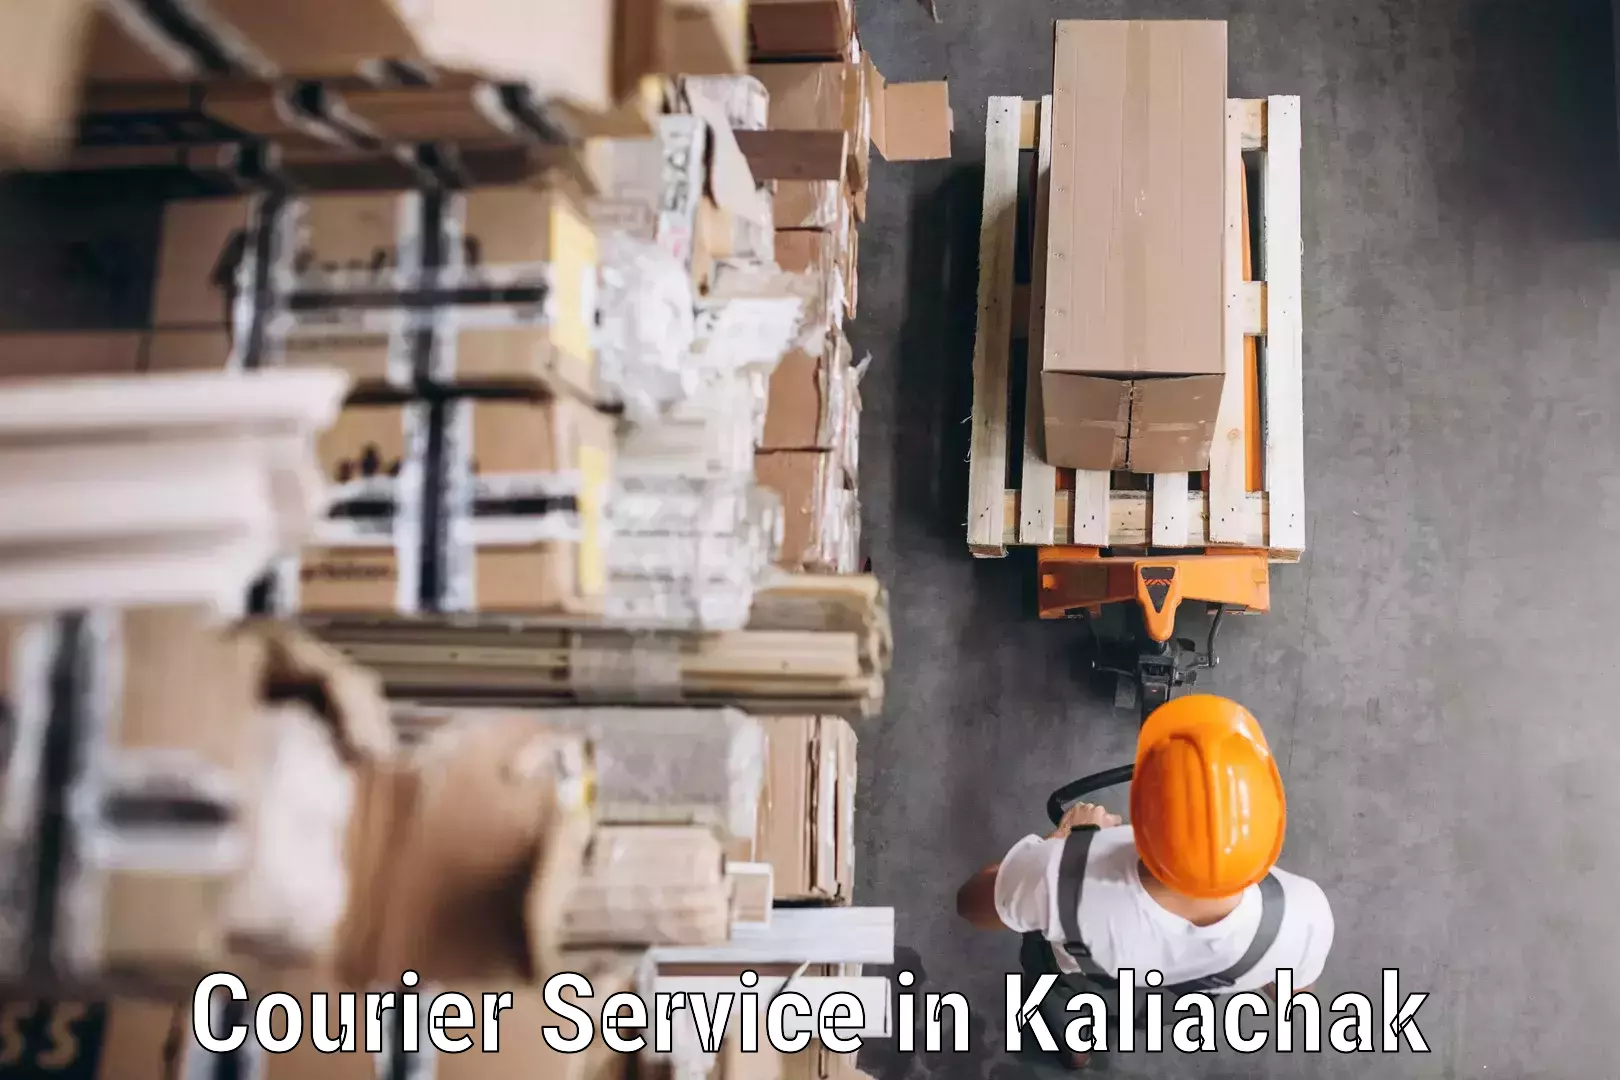 Sustainable courier practices in Kaliachak